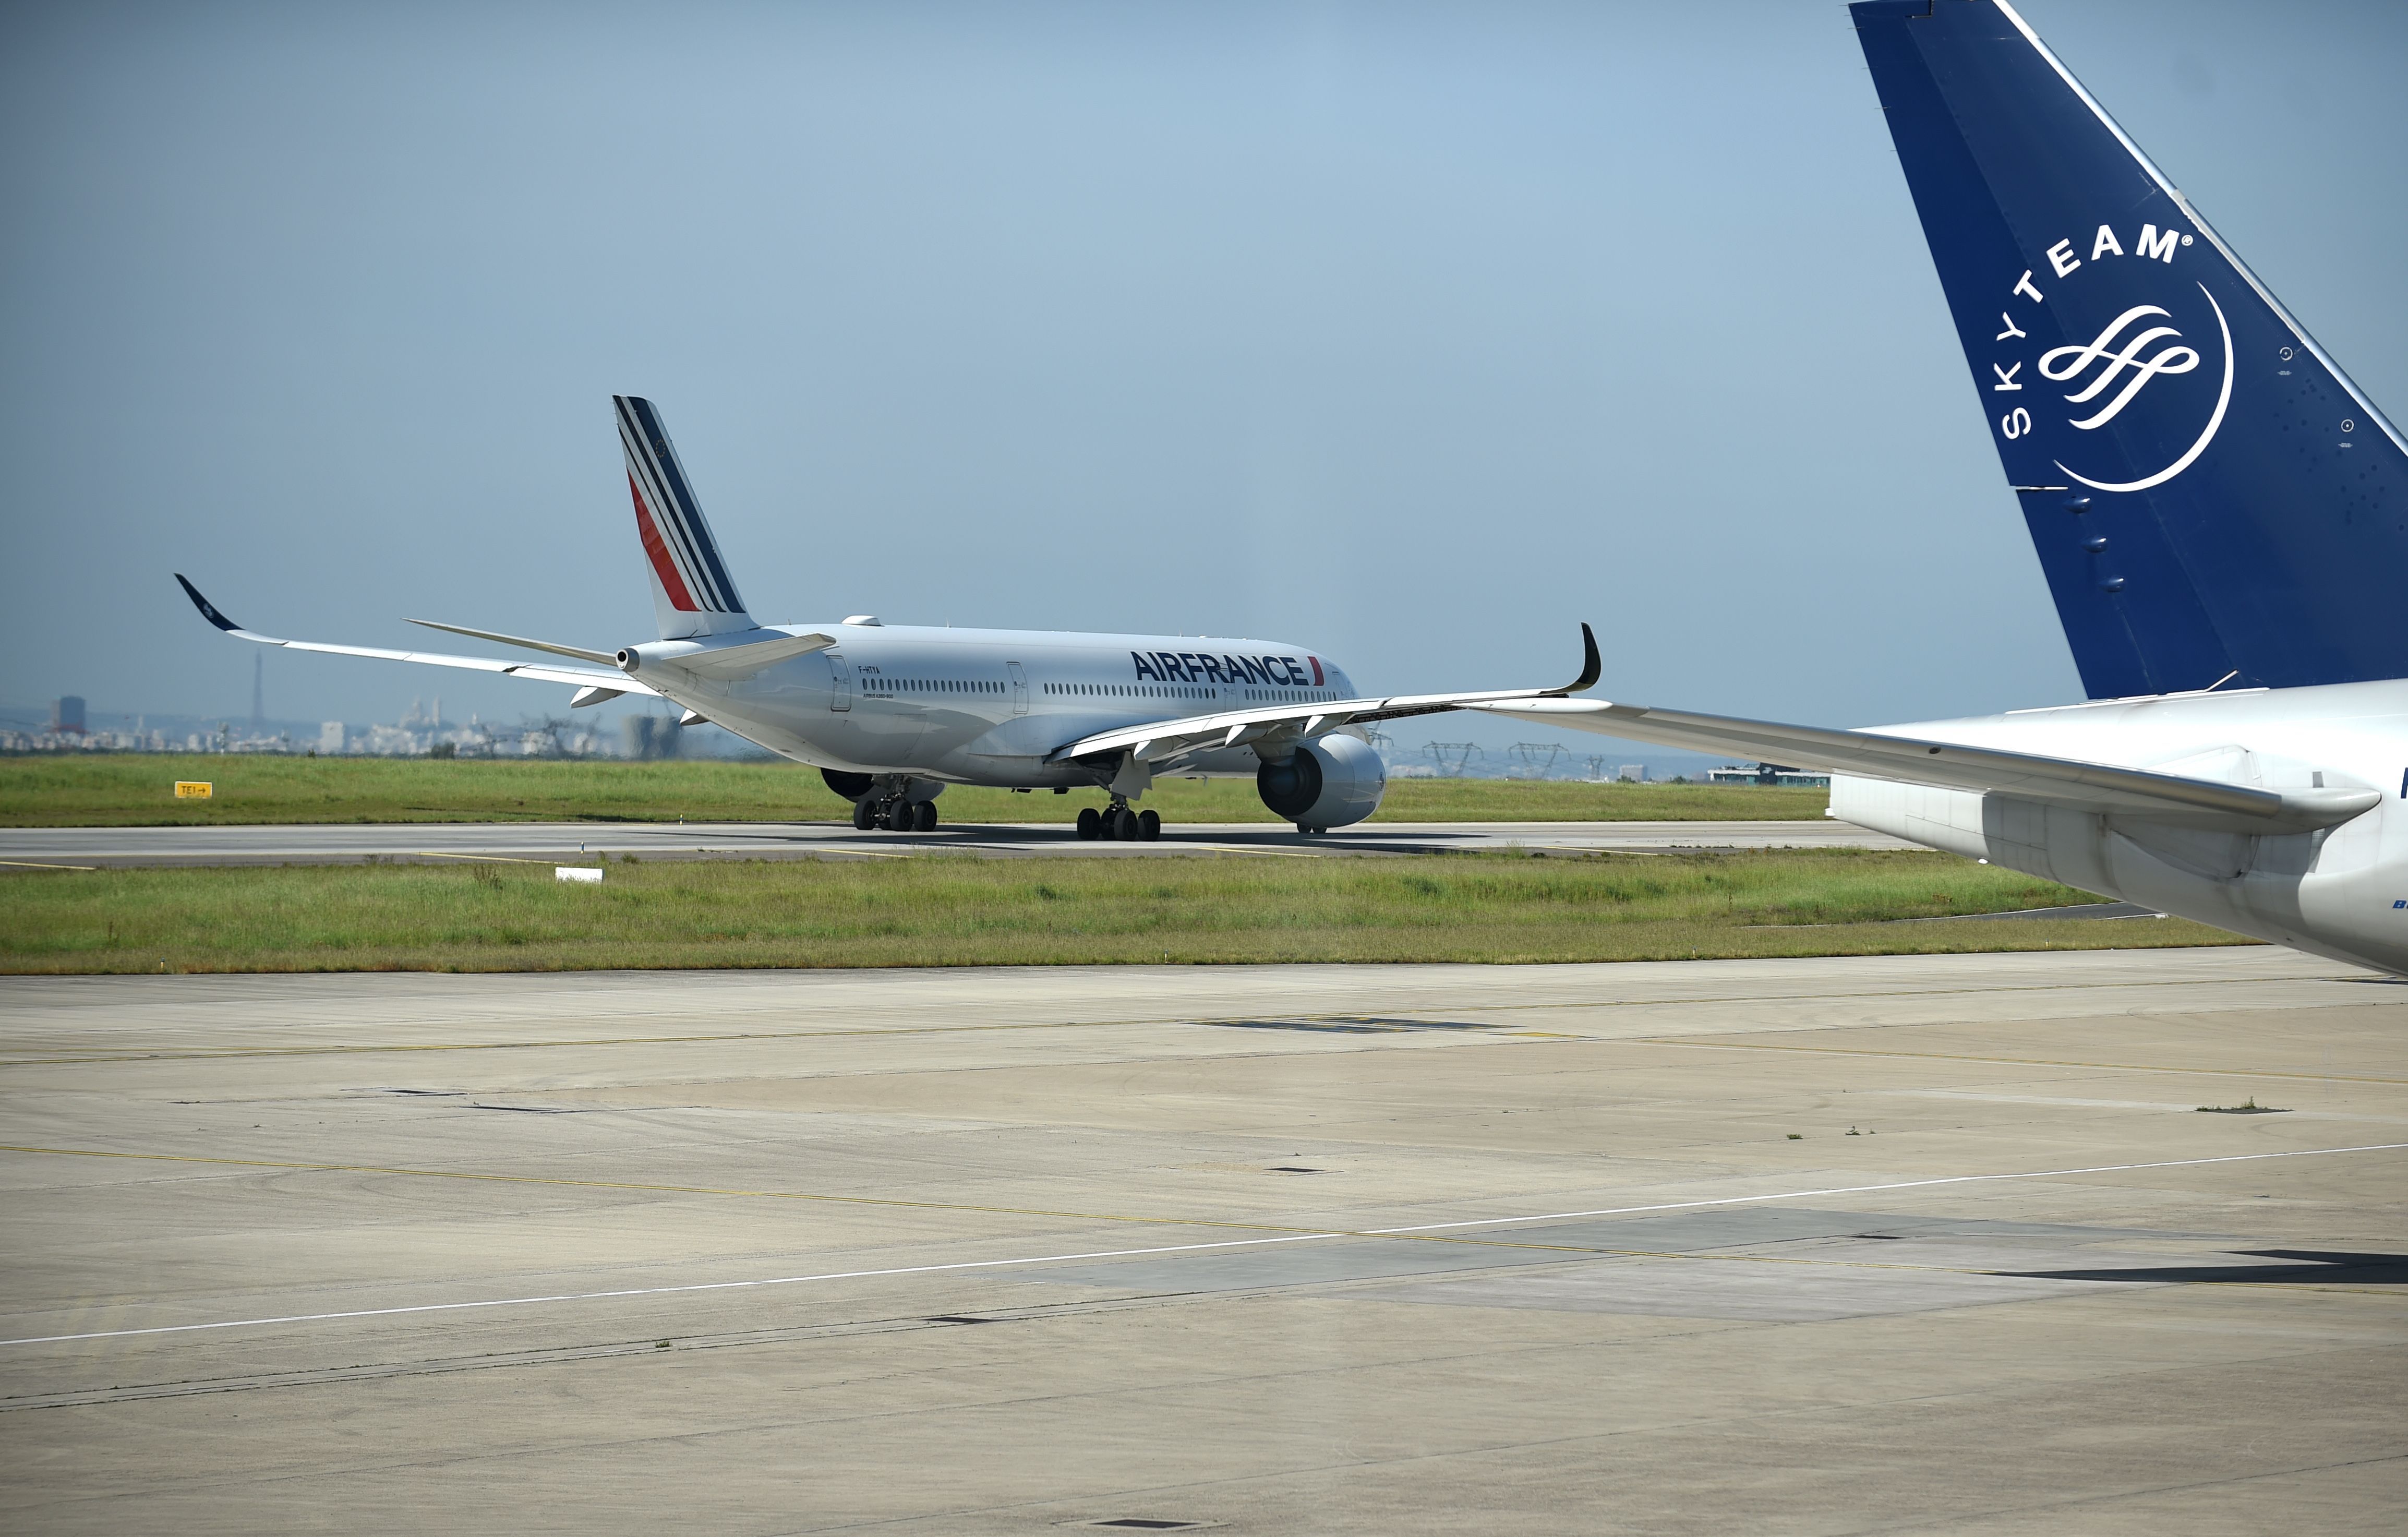 Air France, part of Sky Team looks to simplify its fleet with only four longhaul aircraft types